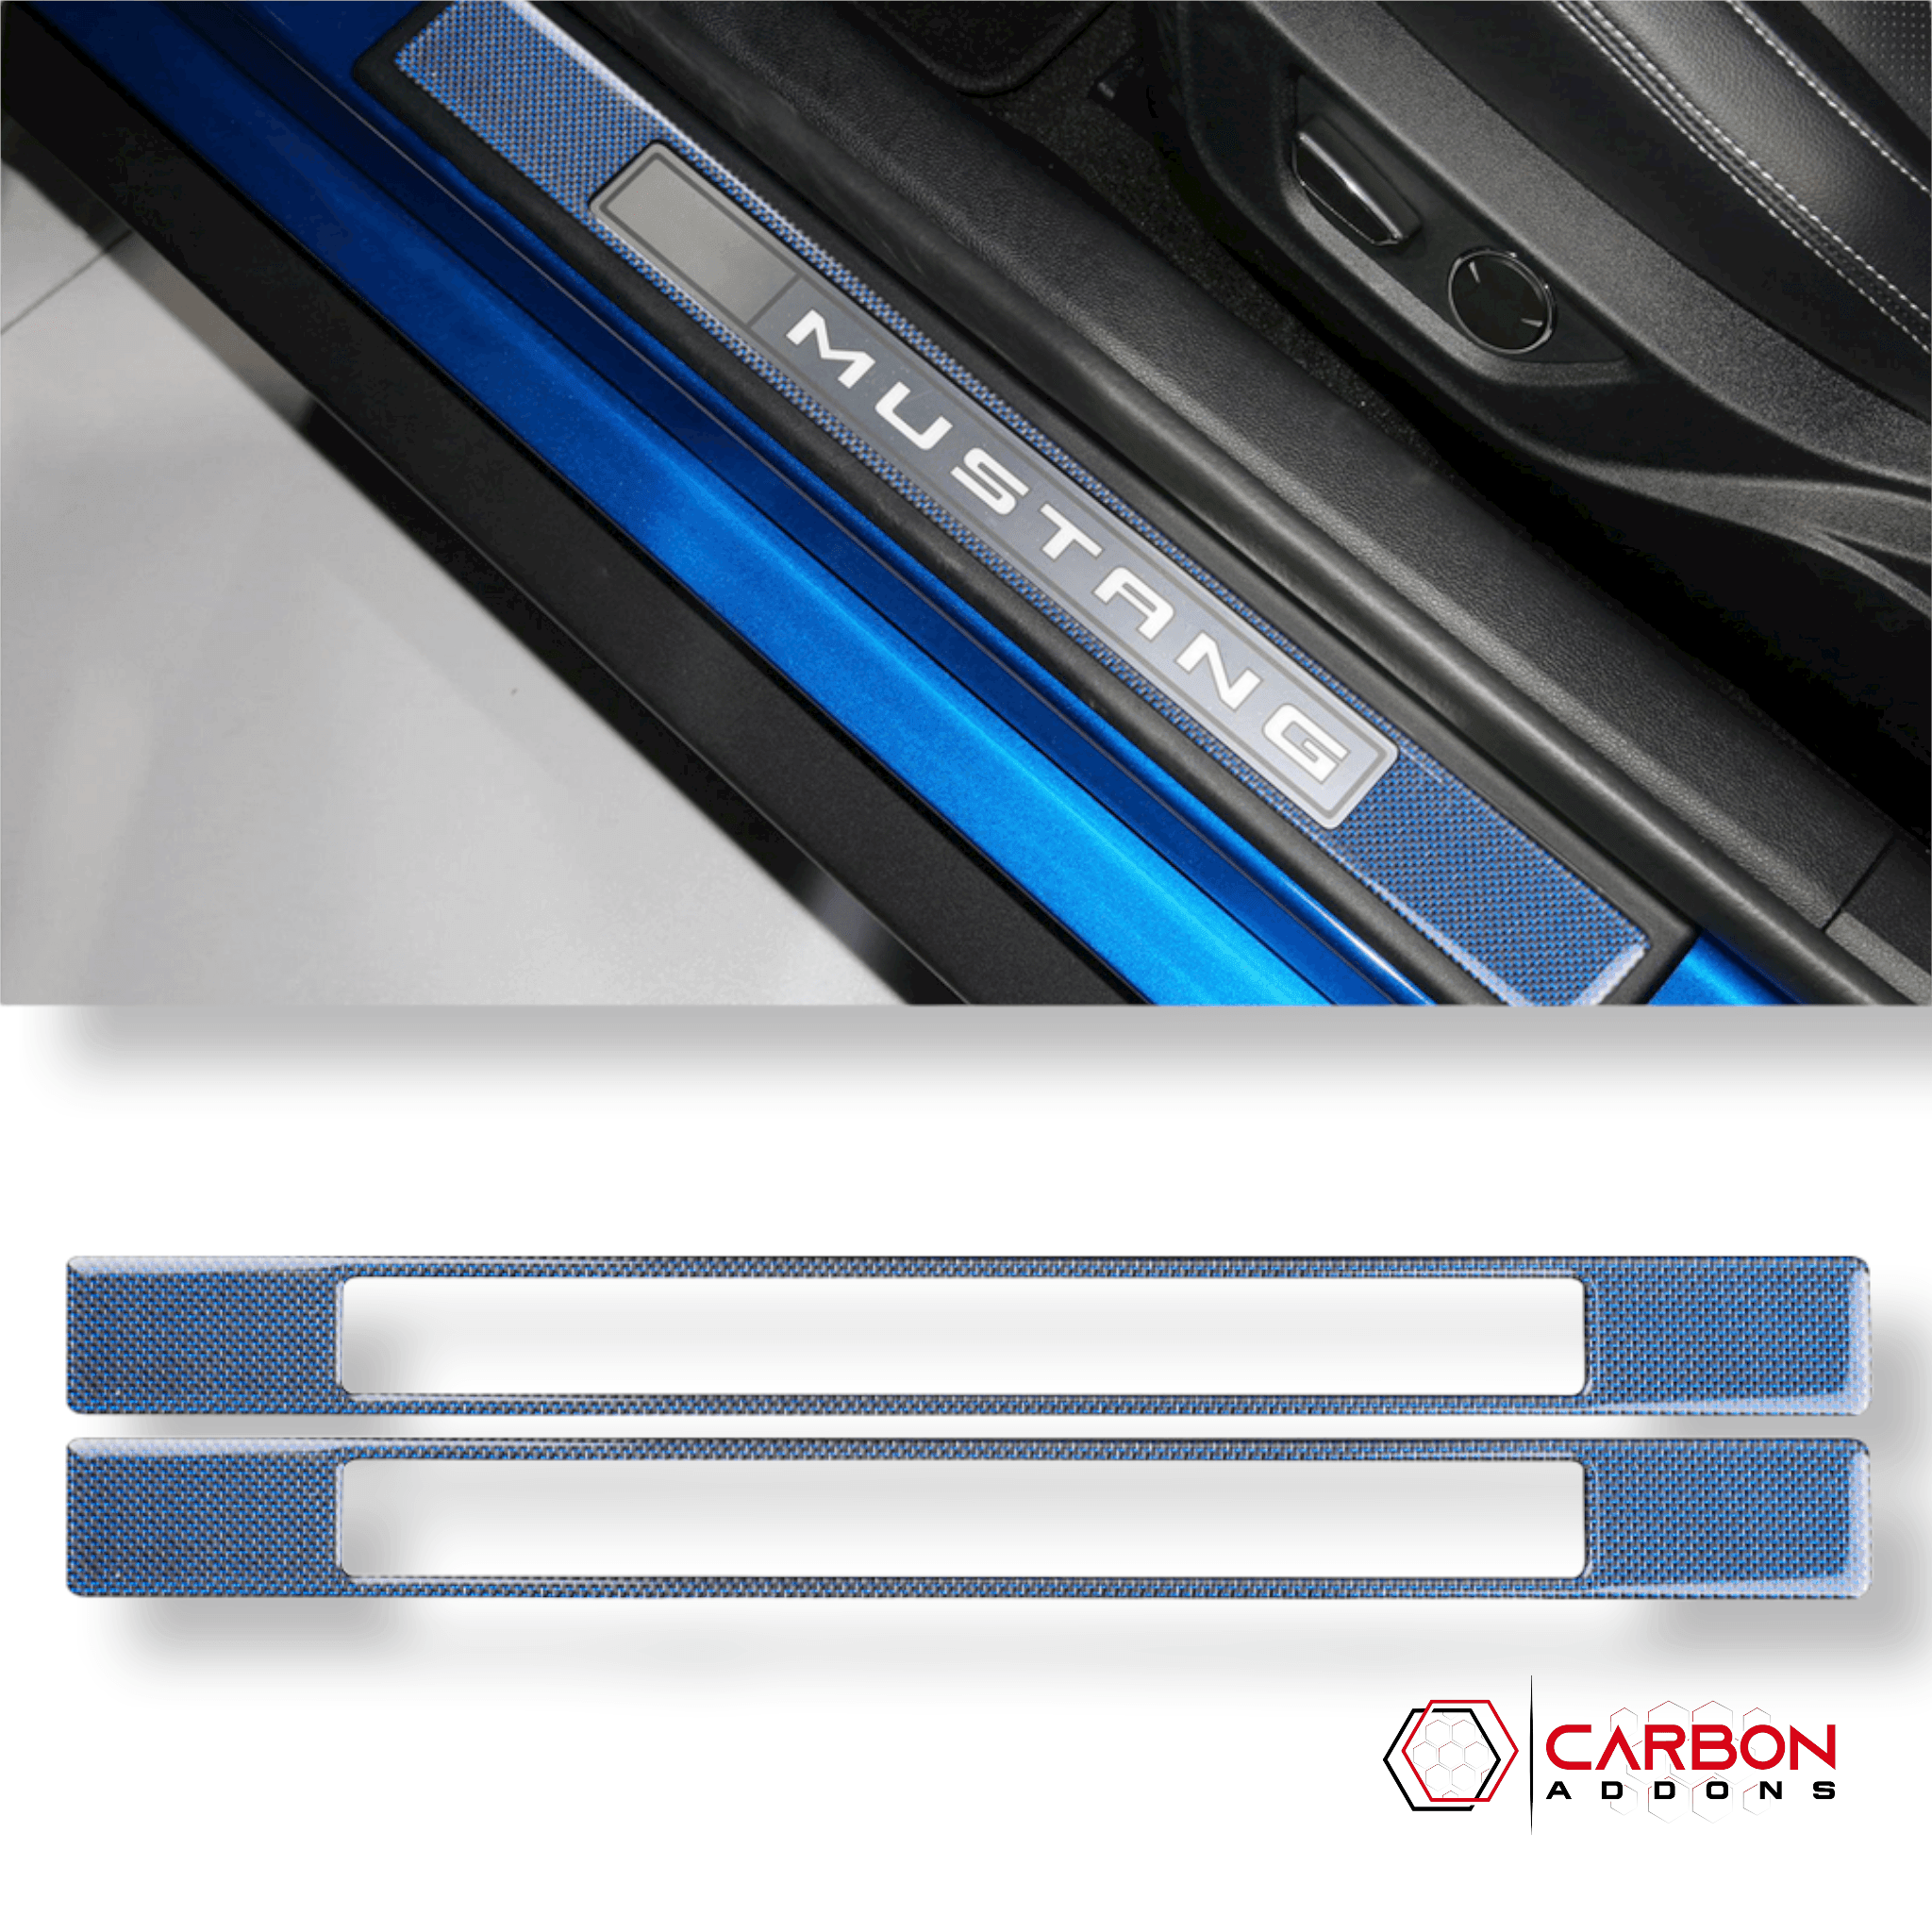 Reflective Carbon Fiber Inner Door Sills Trim Overlay for Ford Mustang 2015-2023 - carbonaddons Carbon Fiber Parts, Accessories, Upgrades, Mods